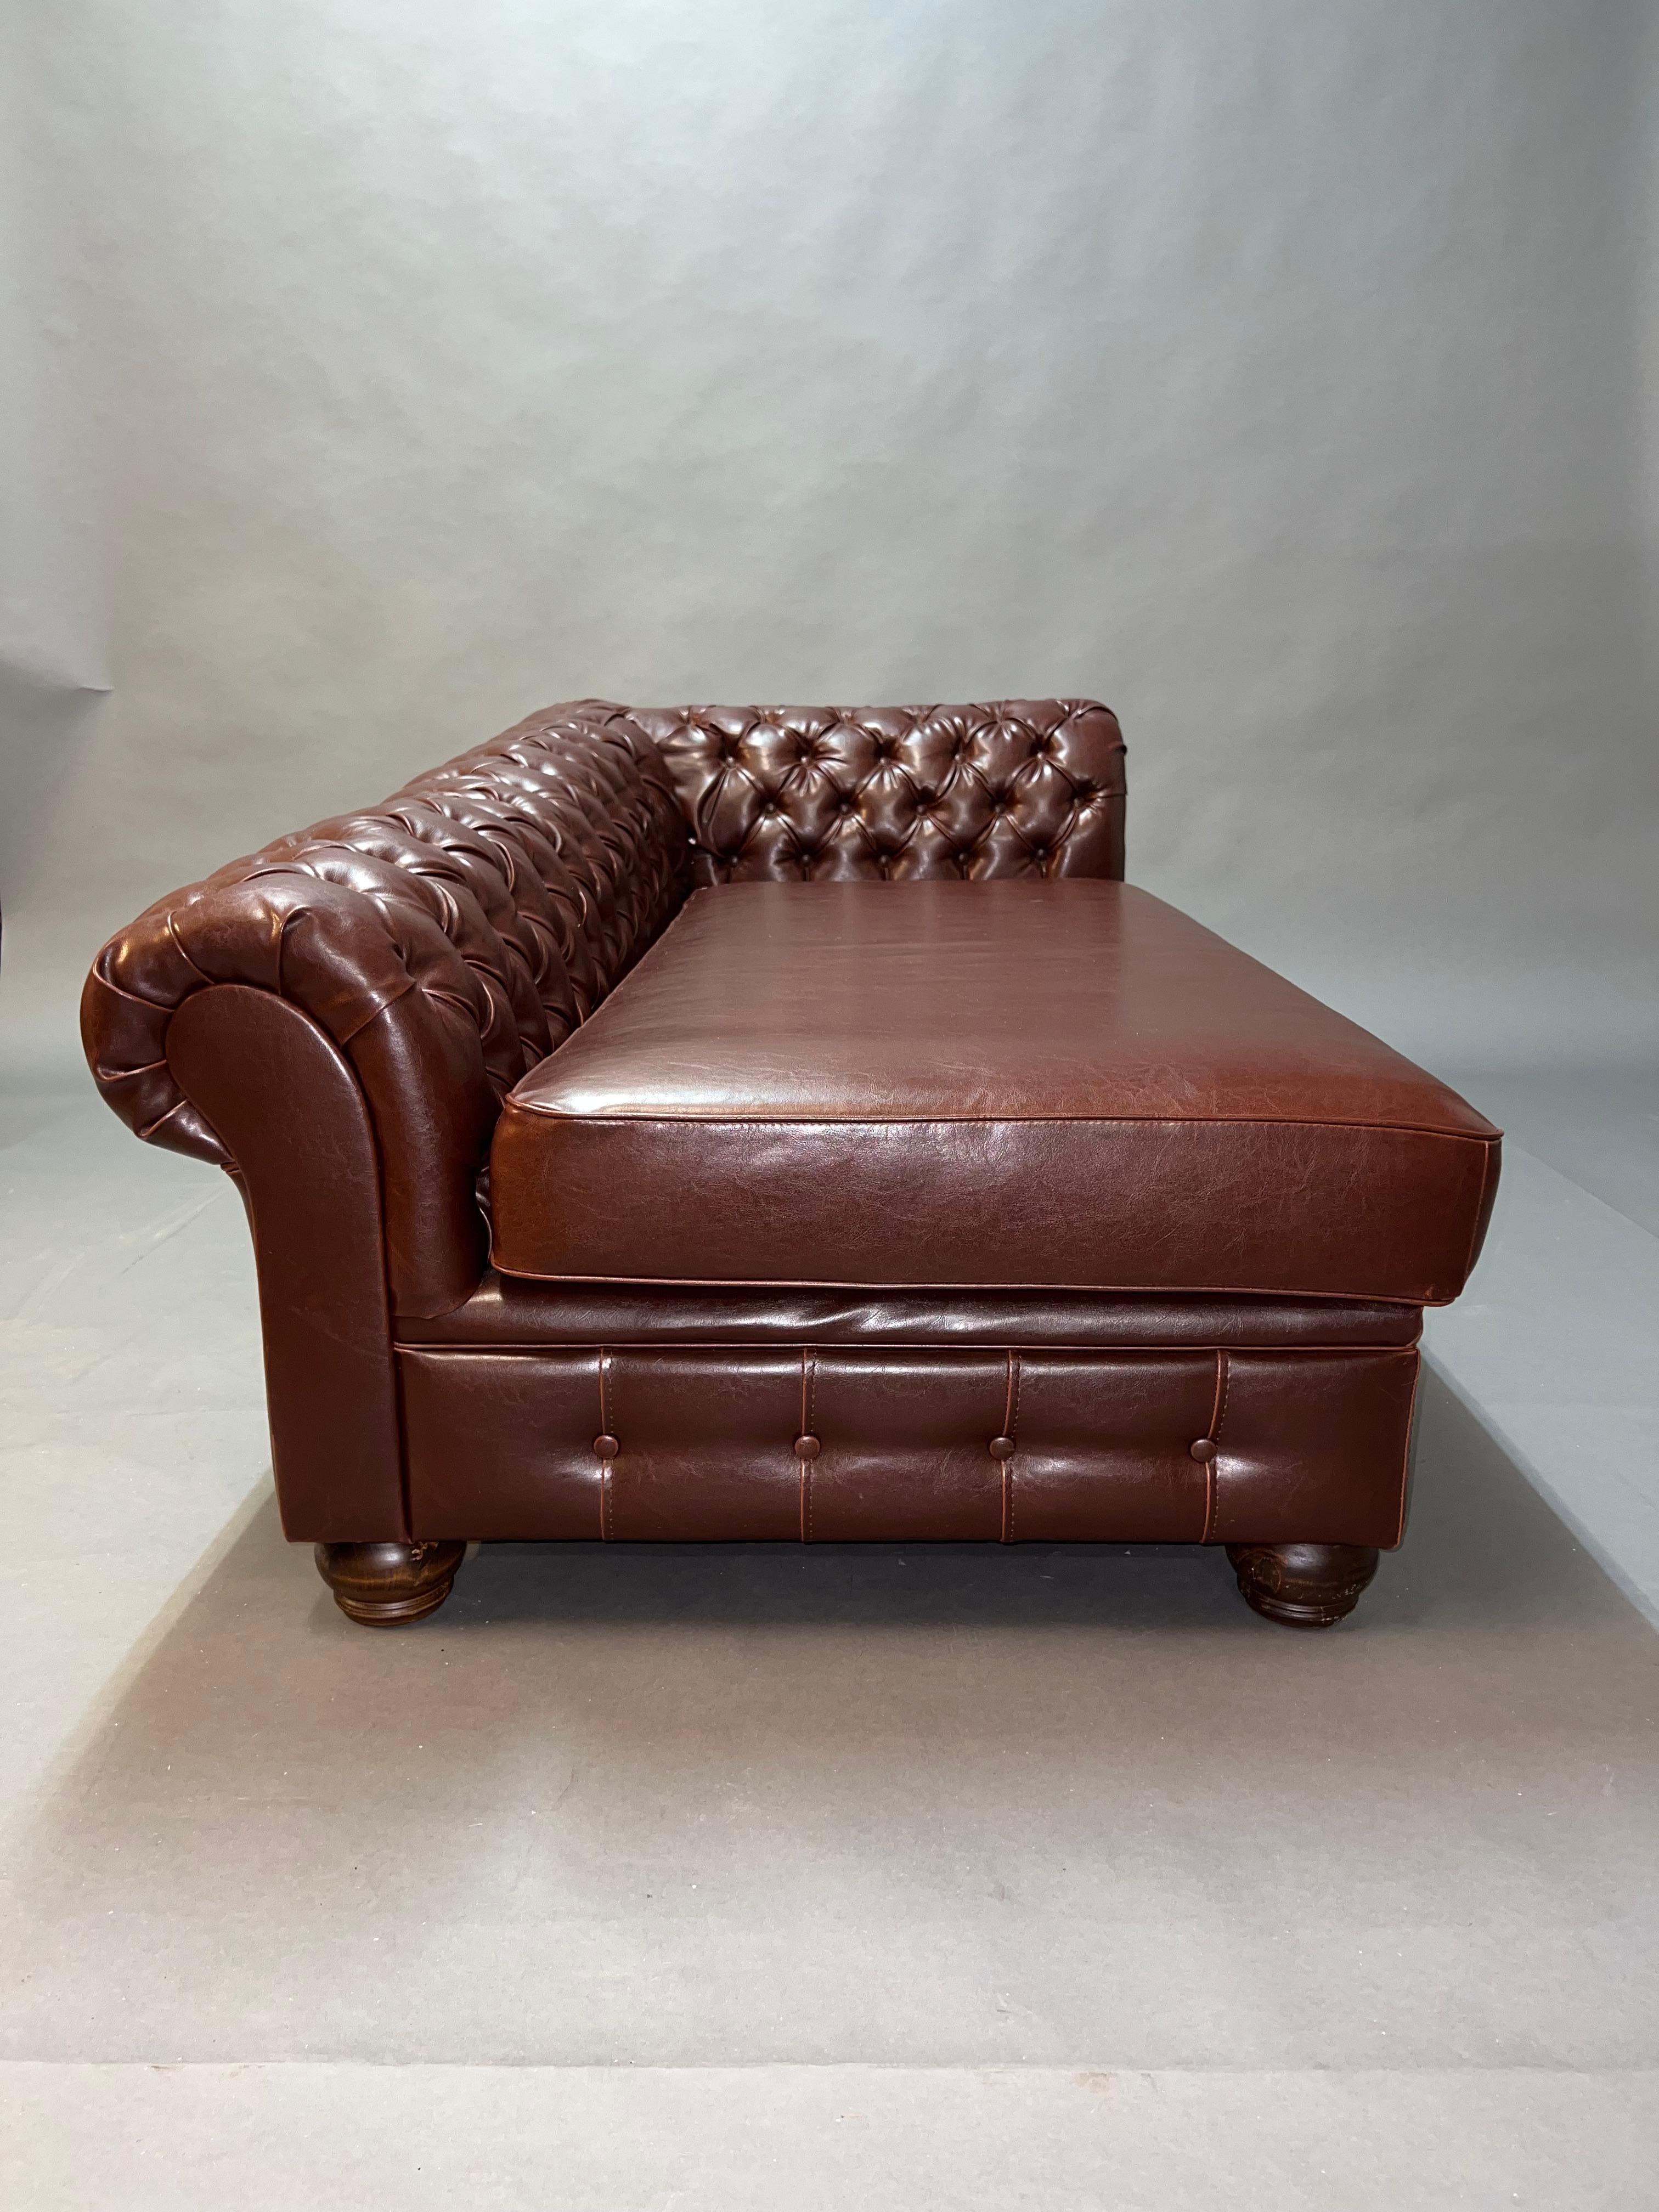 Lovely Vintage Chesterfield Brown Leder Look Chaise Lounge Daybed Sofa im Angebot 2